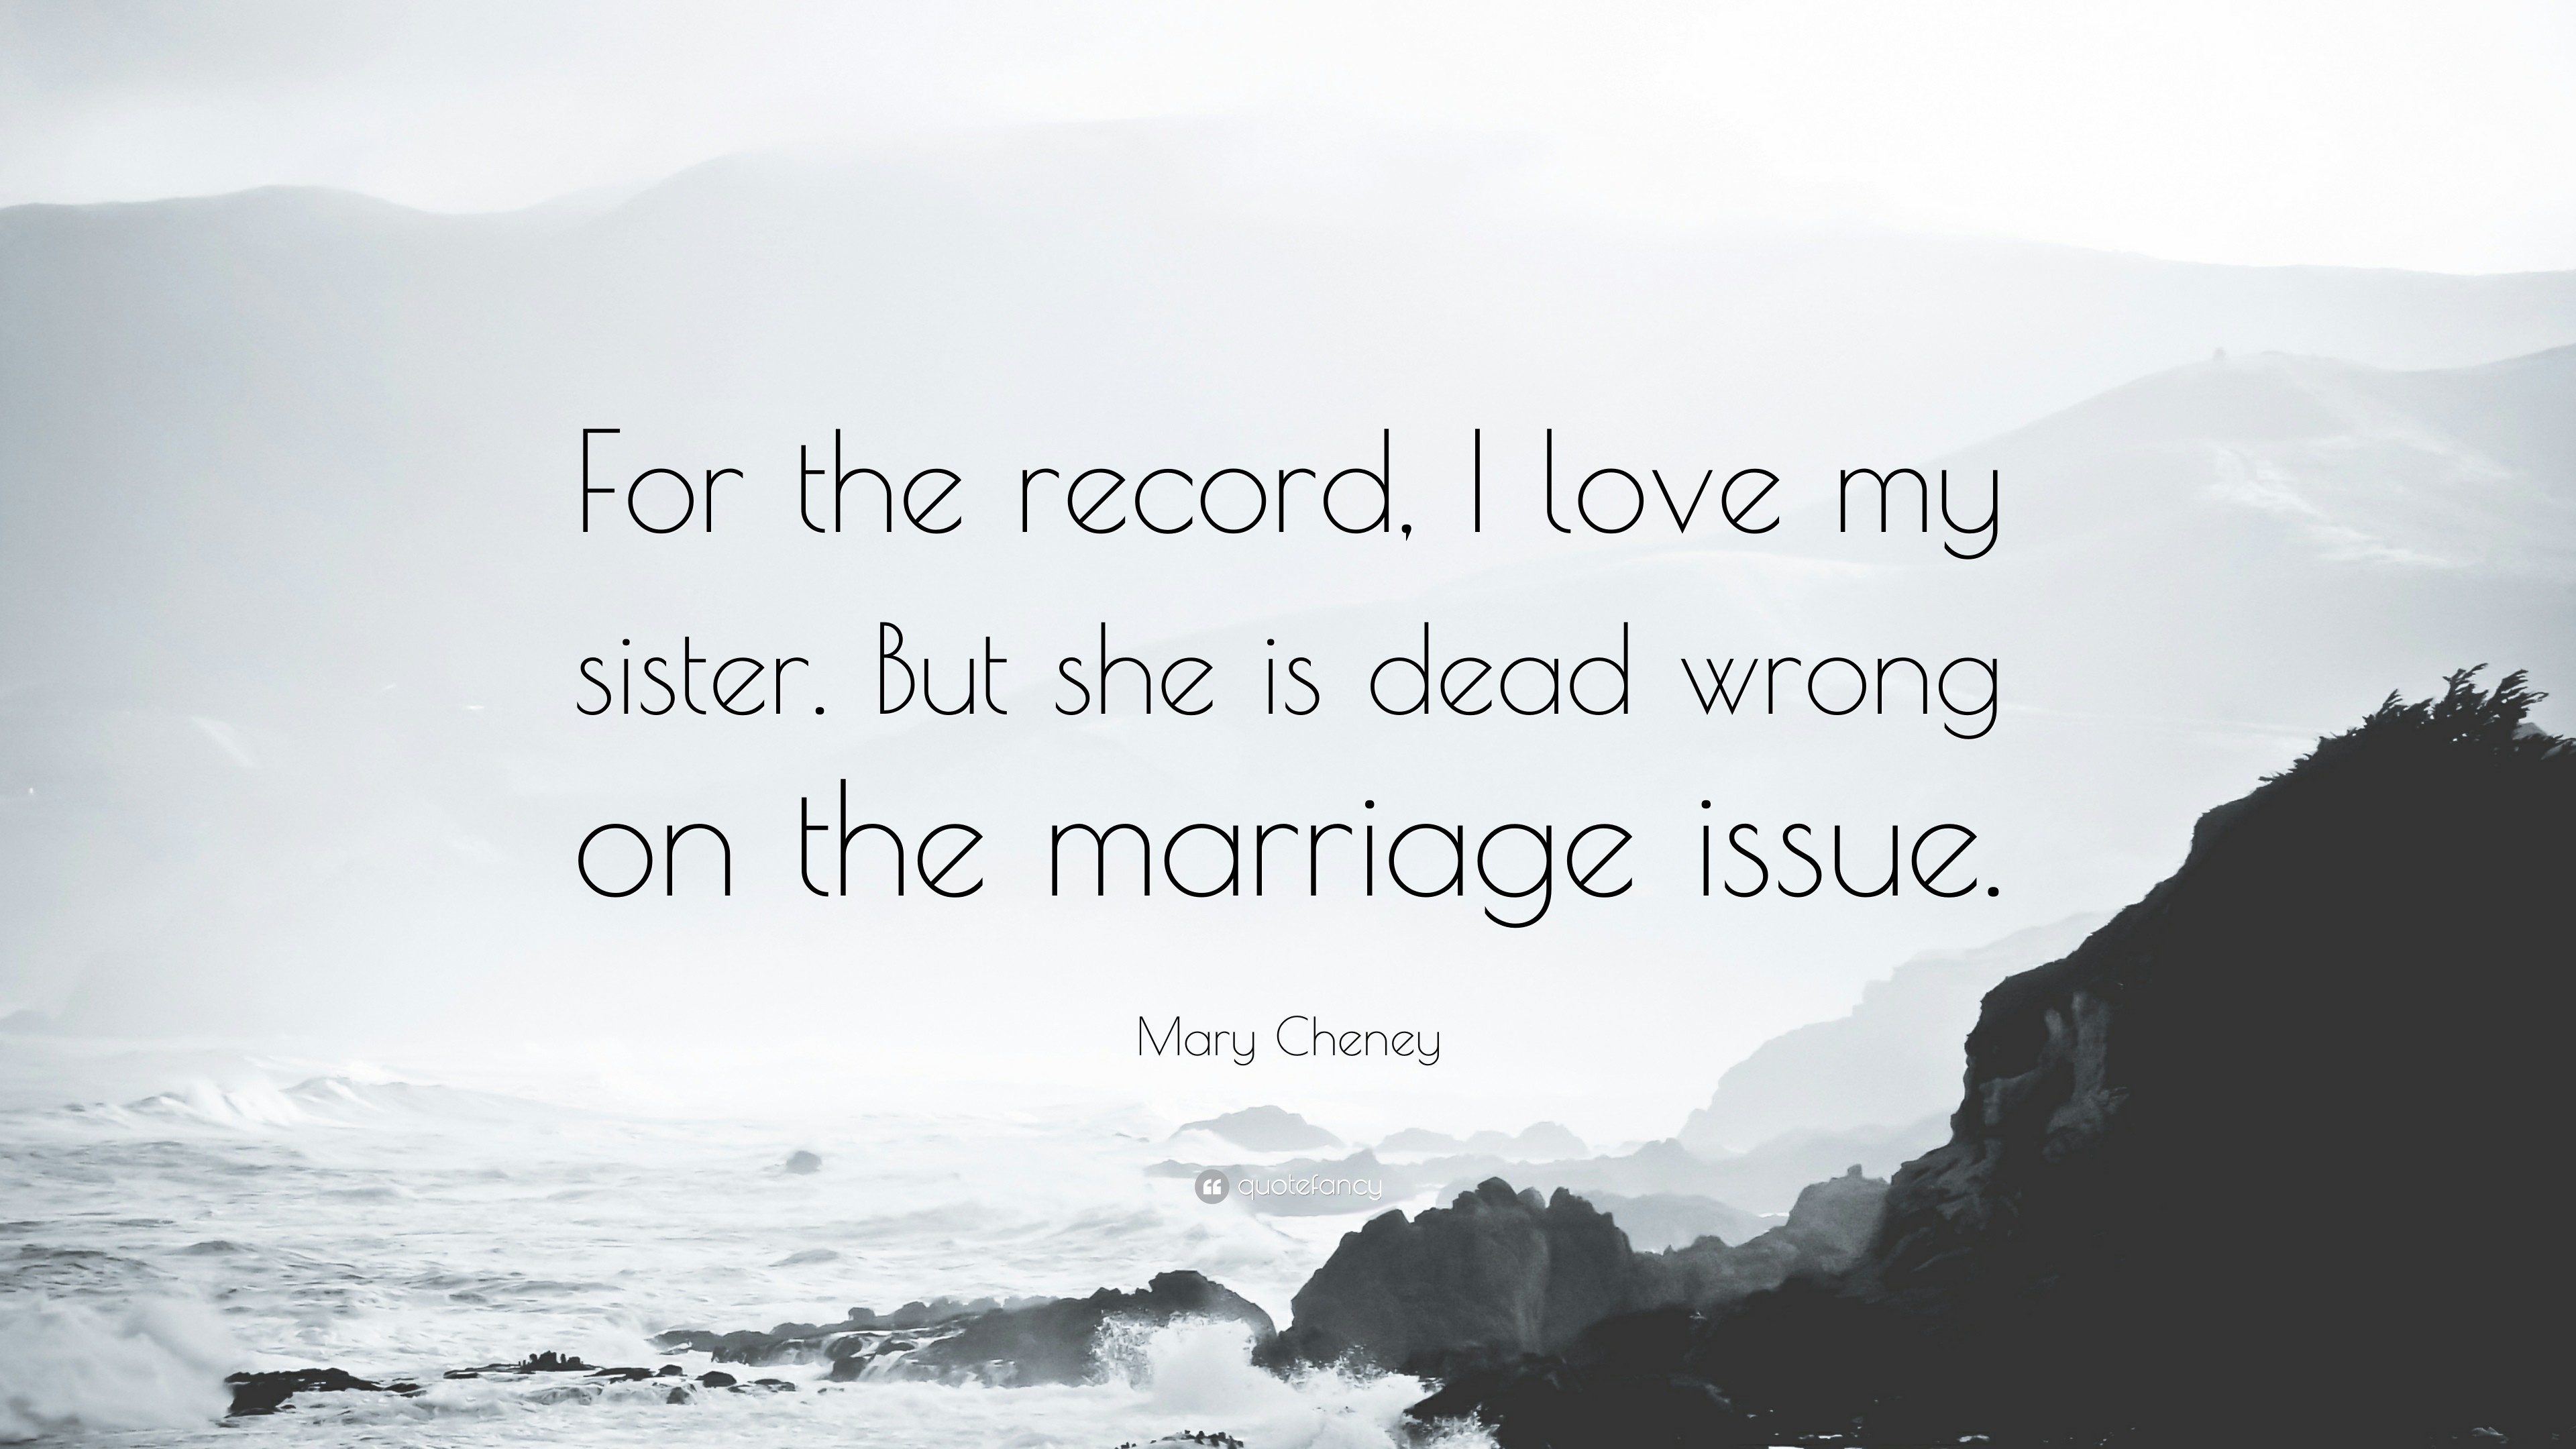 3840x2160 Mary Cheney Quote: “For the record, I love my sister. But she